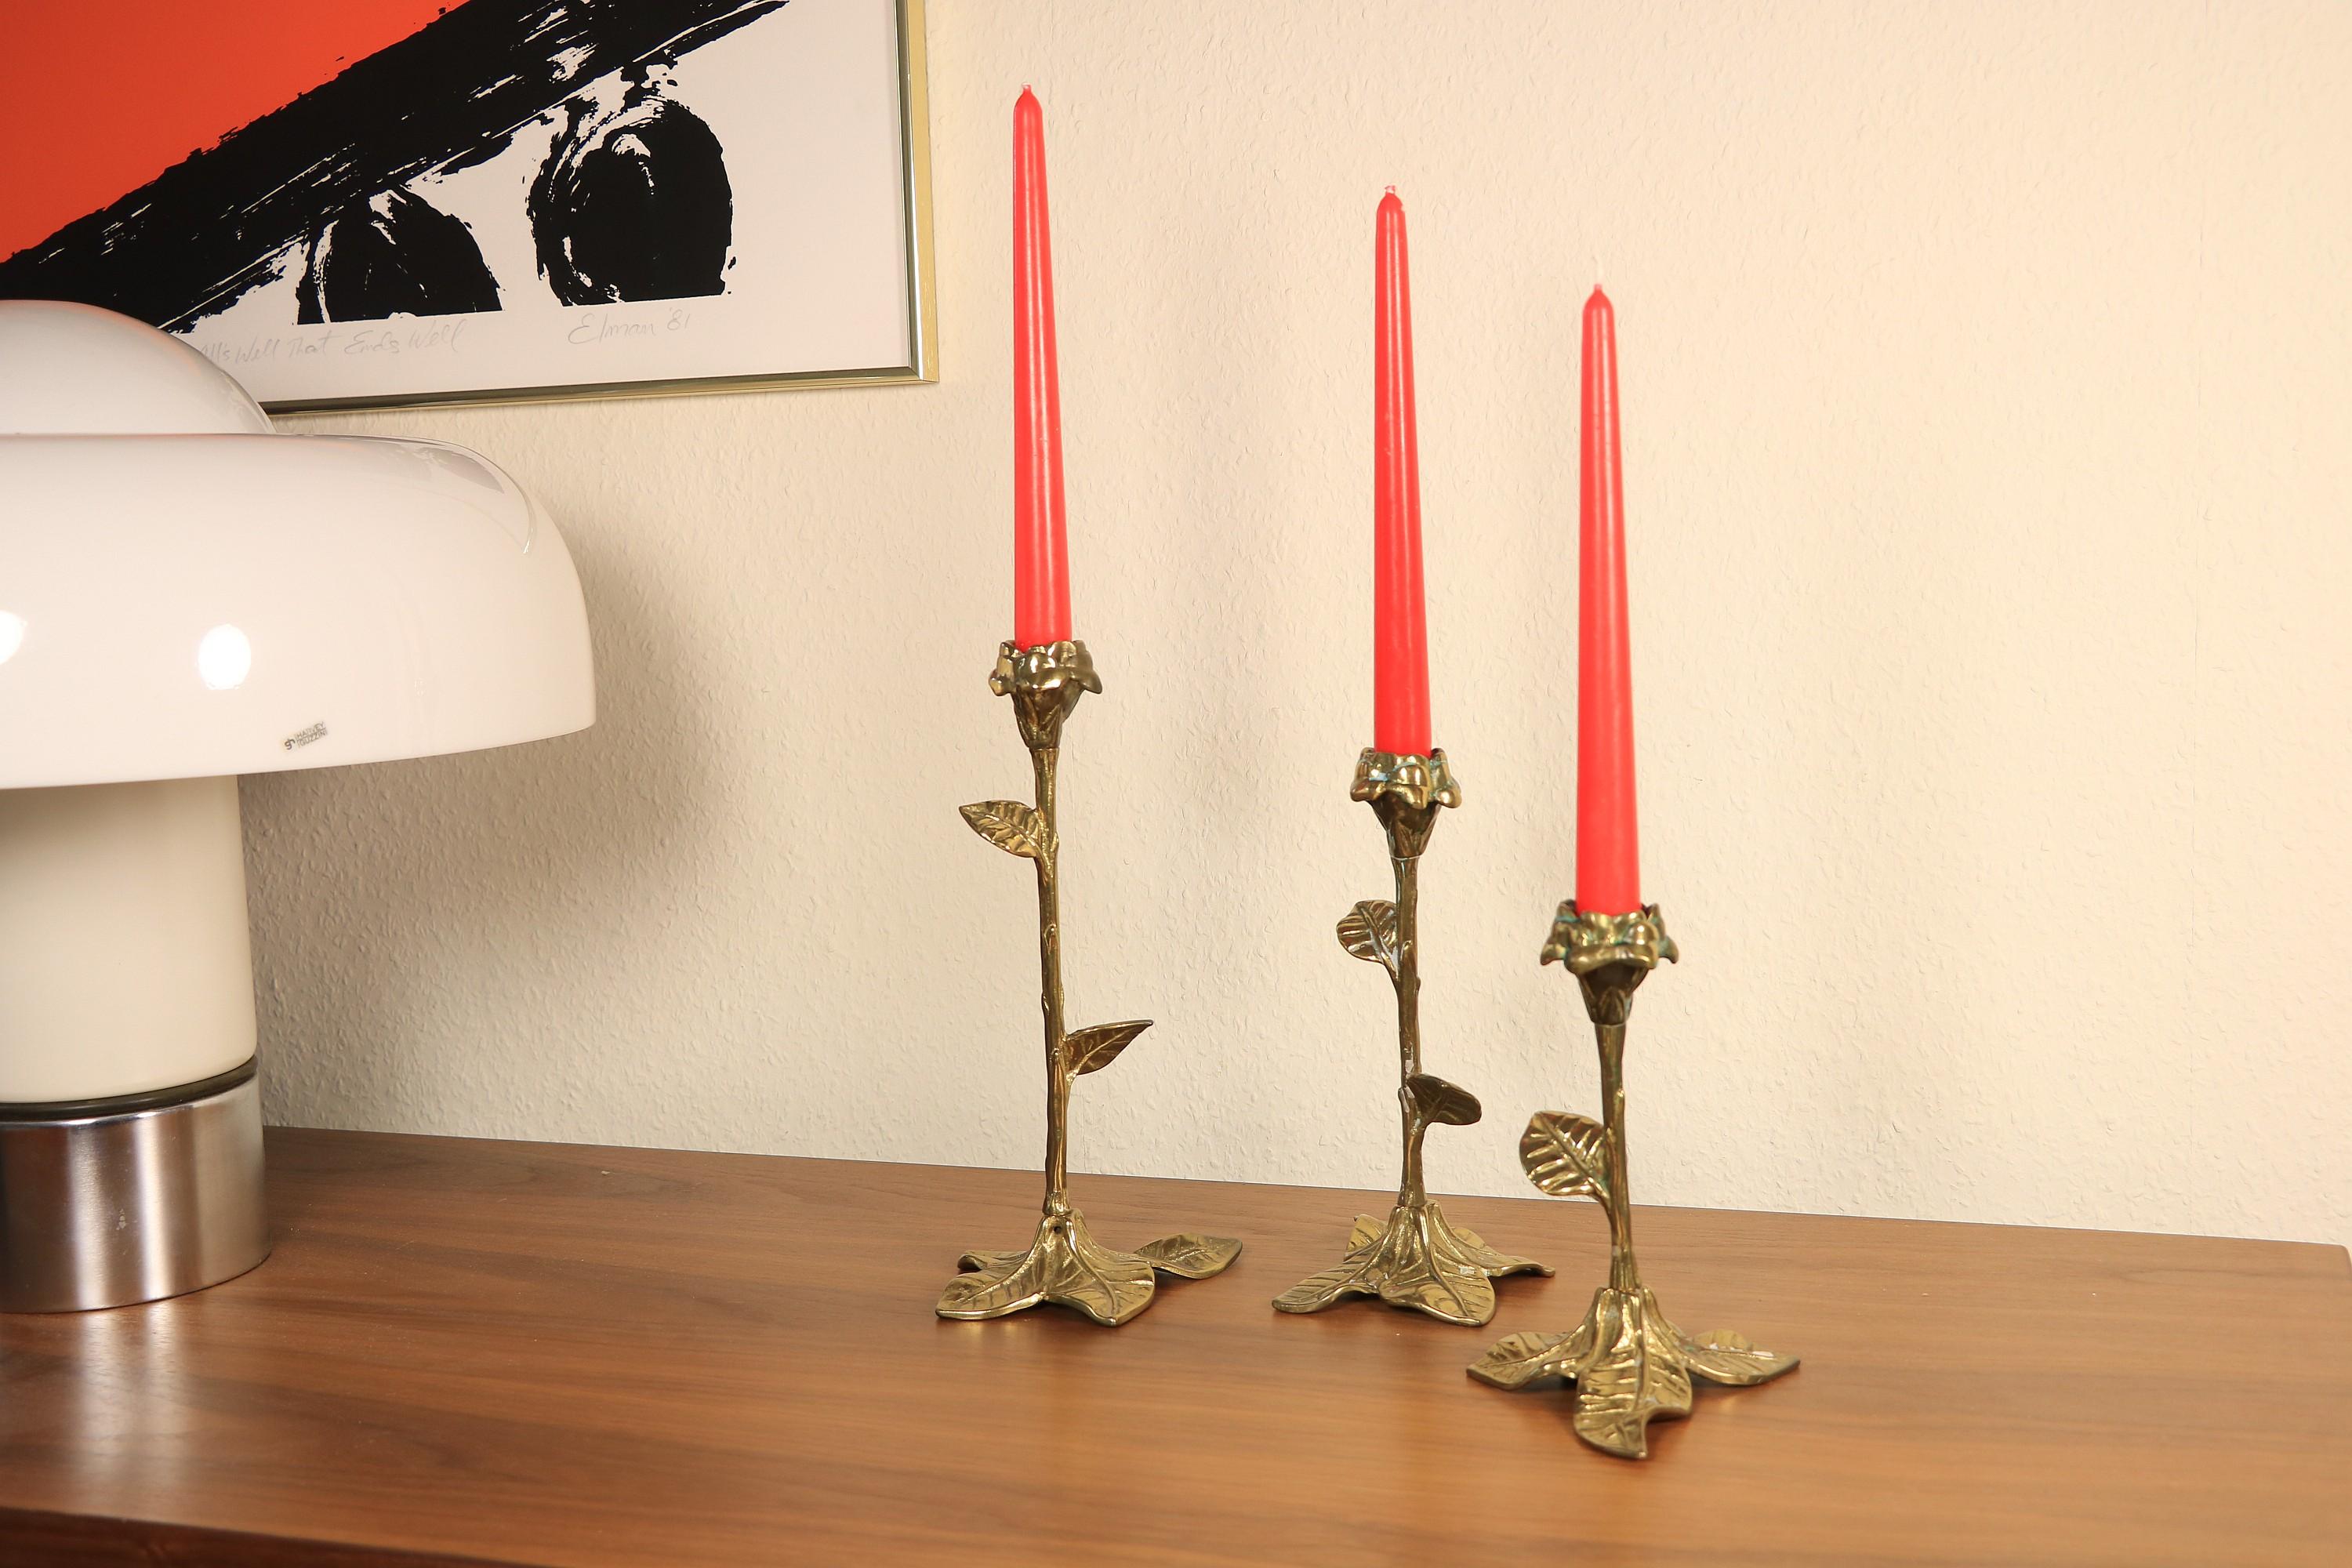 3 x decorative candlesticks in brass.
Floral design. In the manner of Hollywood regency.
 
Measures: 27 cm / 10.63 inches, 22 cm / 8.66 inches, 18 cm / 7.06 inches high.

Foot has a diameter of 15 cm / 5.9 inches.
 
Very well preserved with